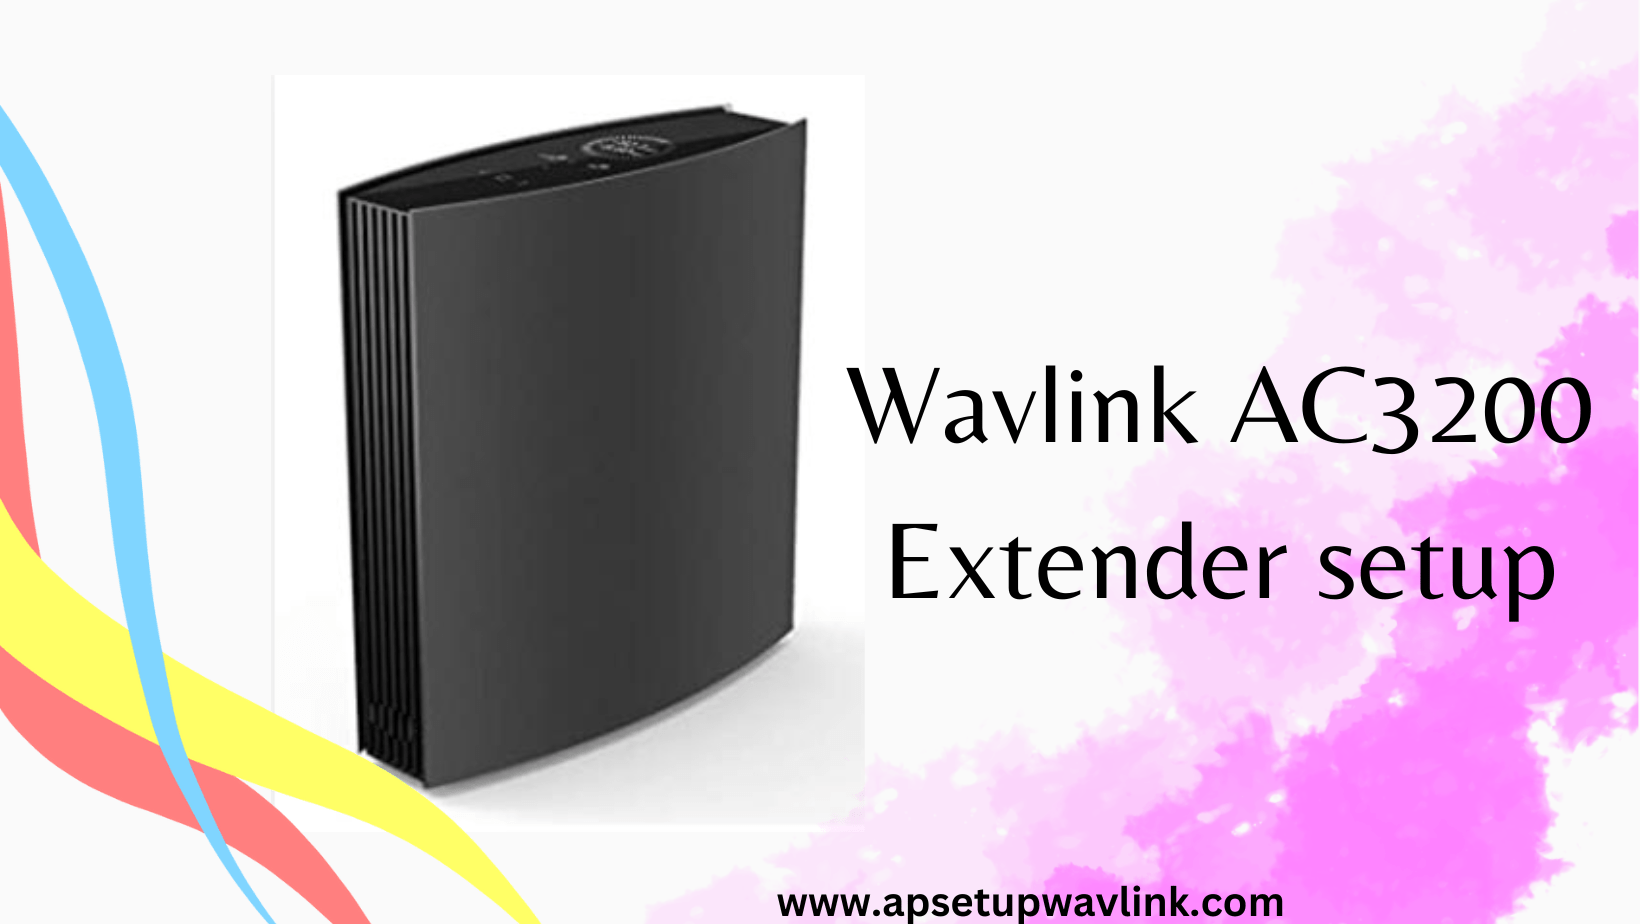 You are currently viewing Wavlink AC3200 Extender setup